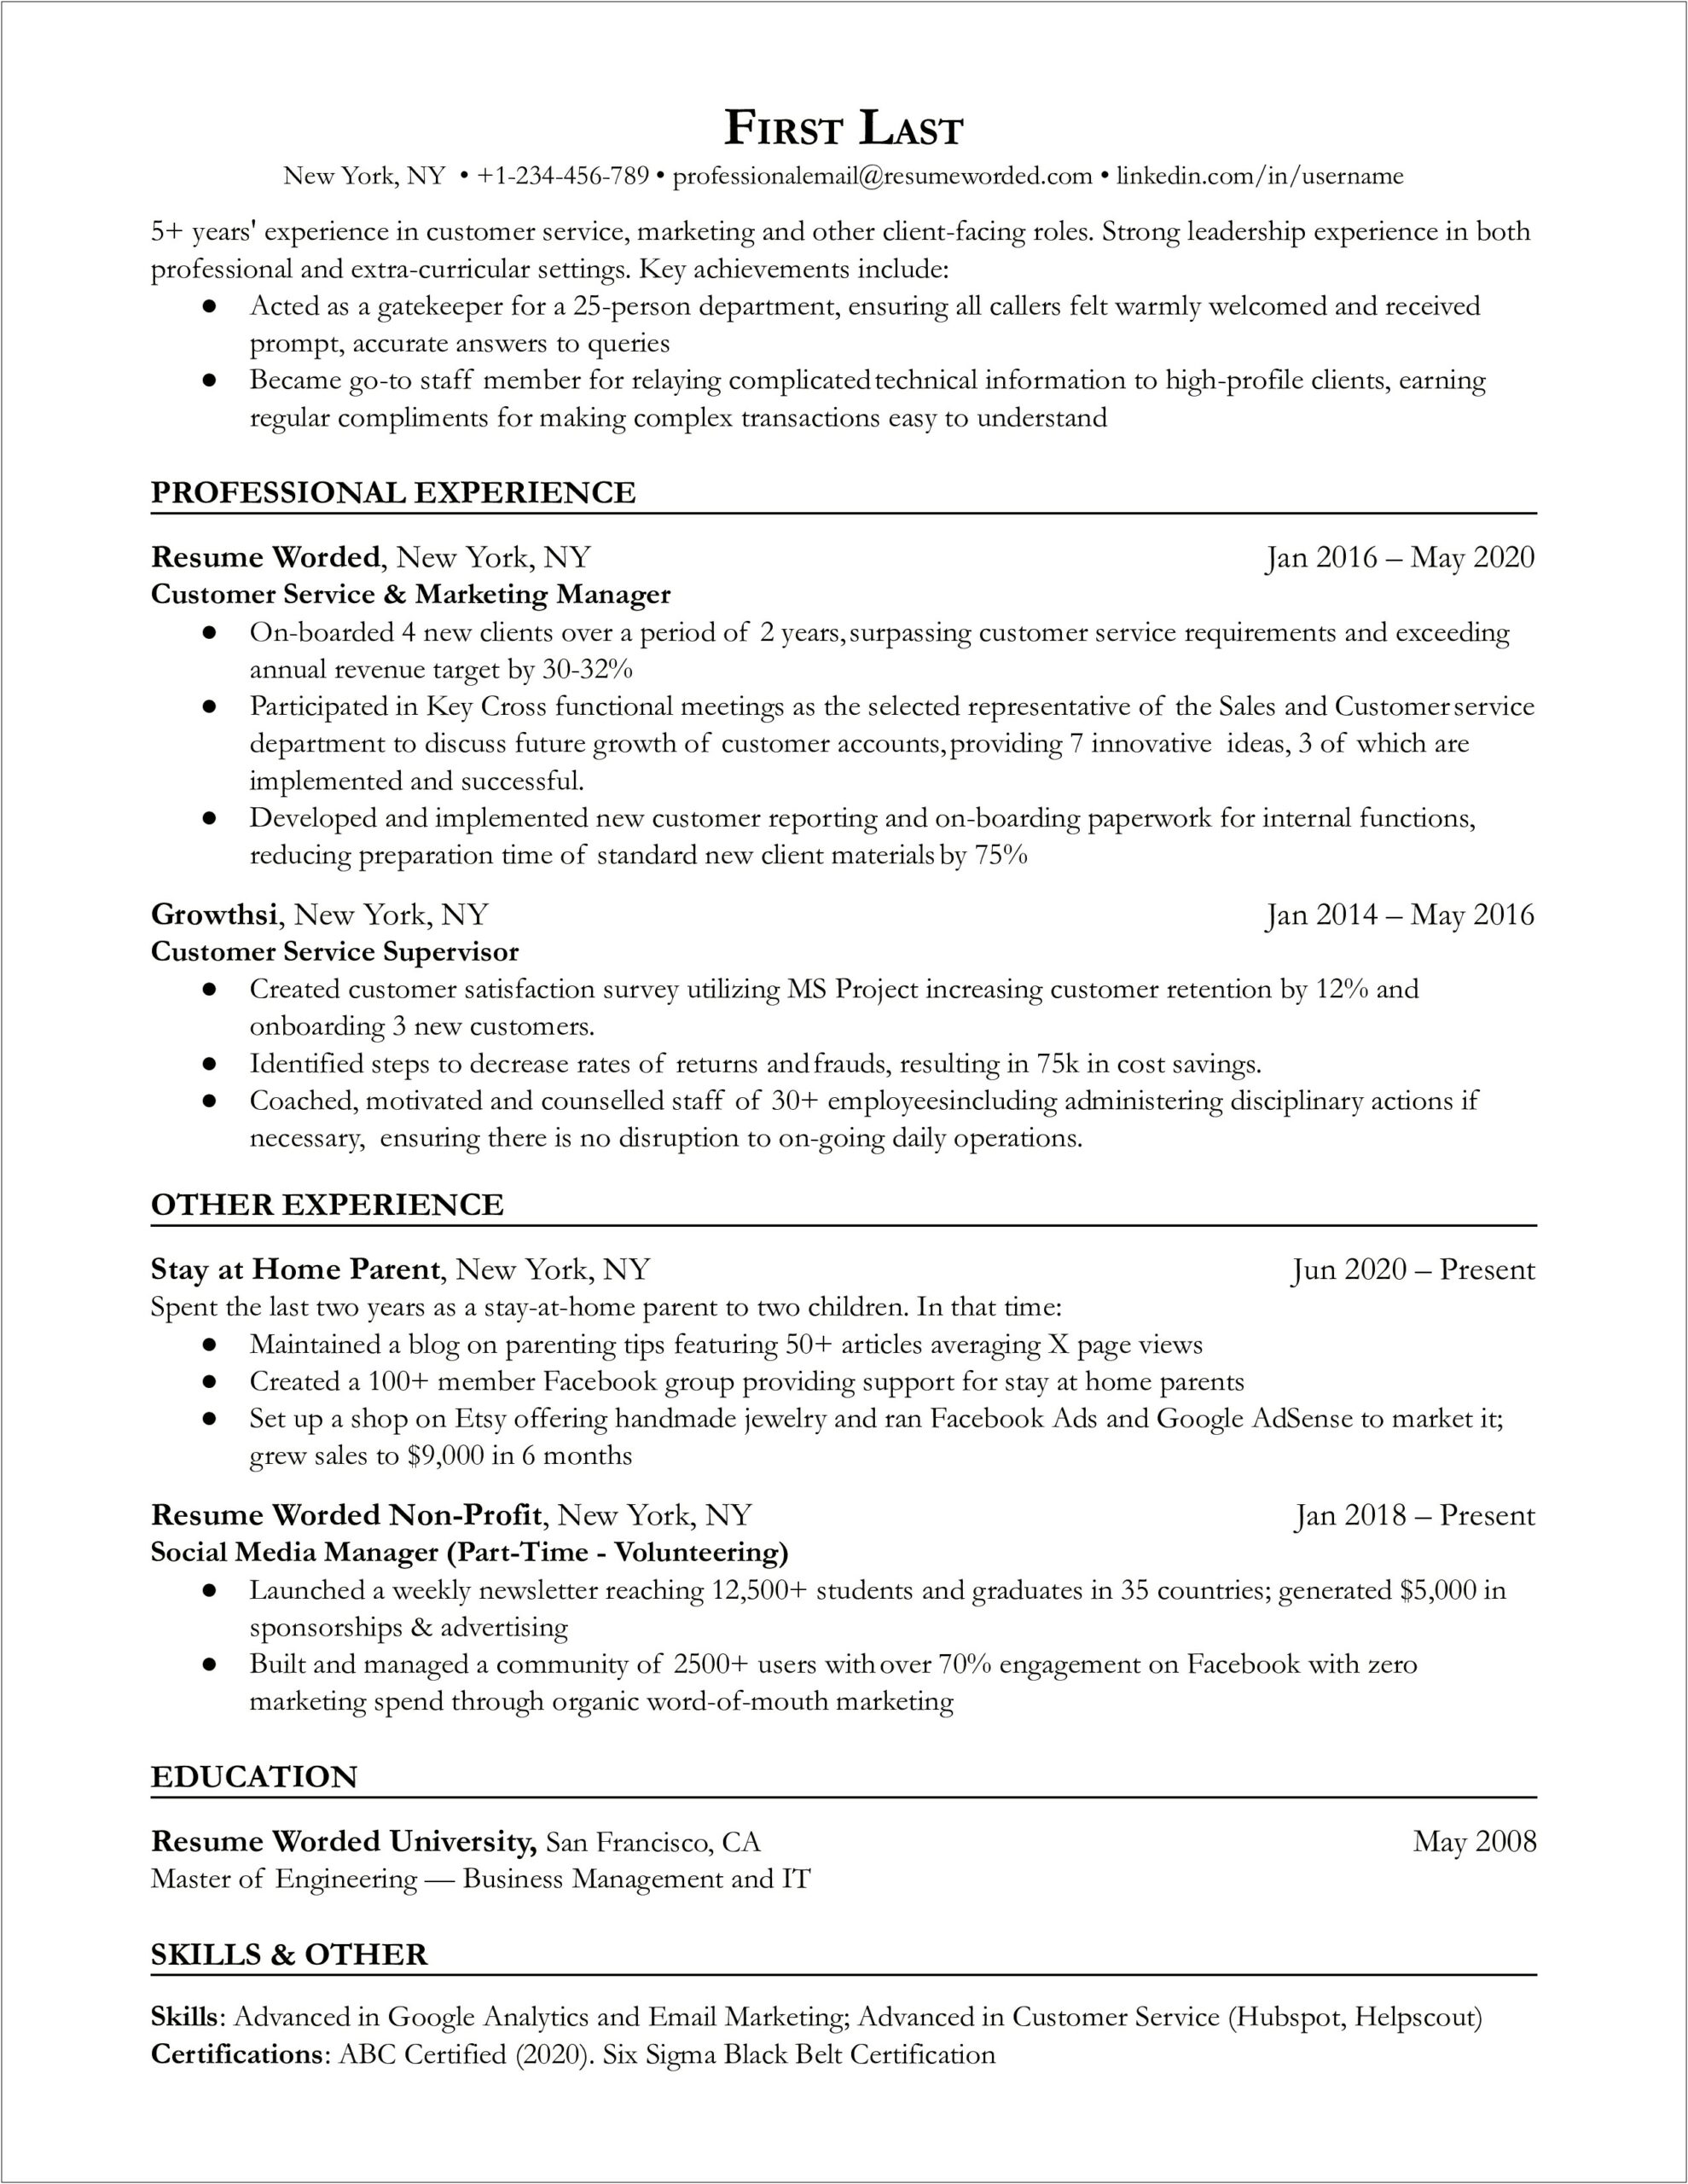 Resume Examples For Returning To Workforce